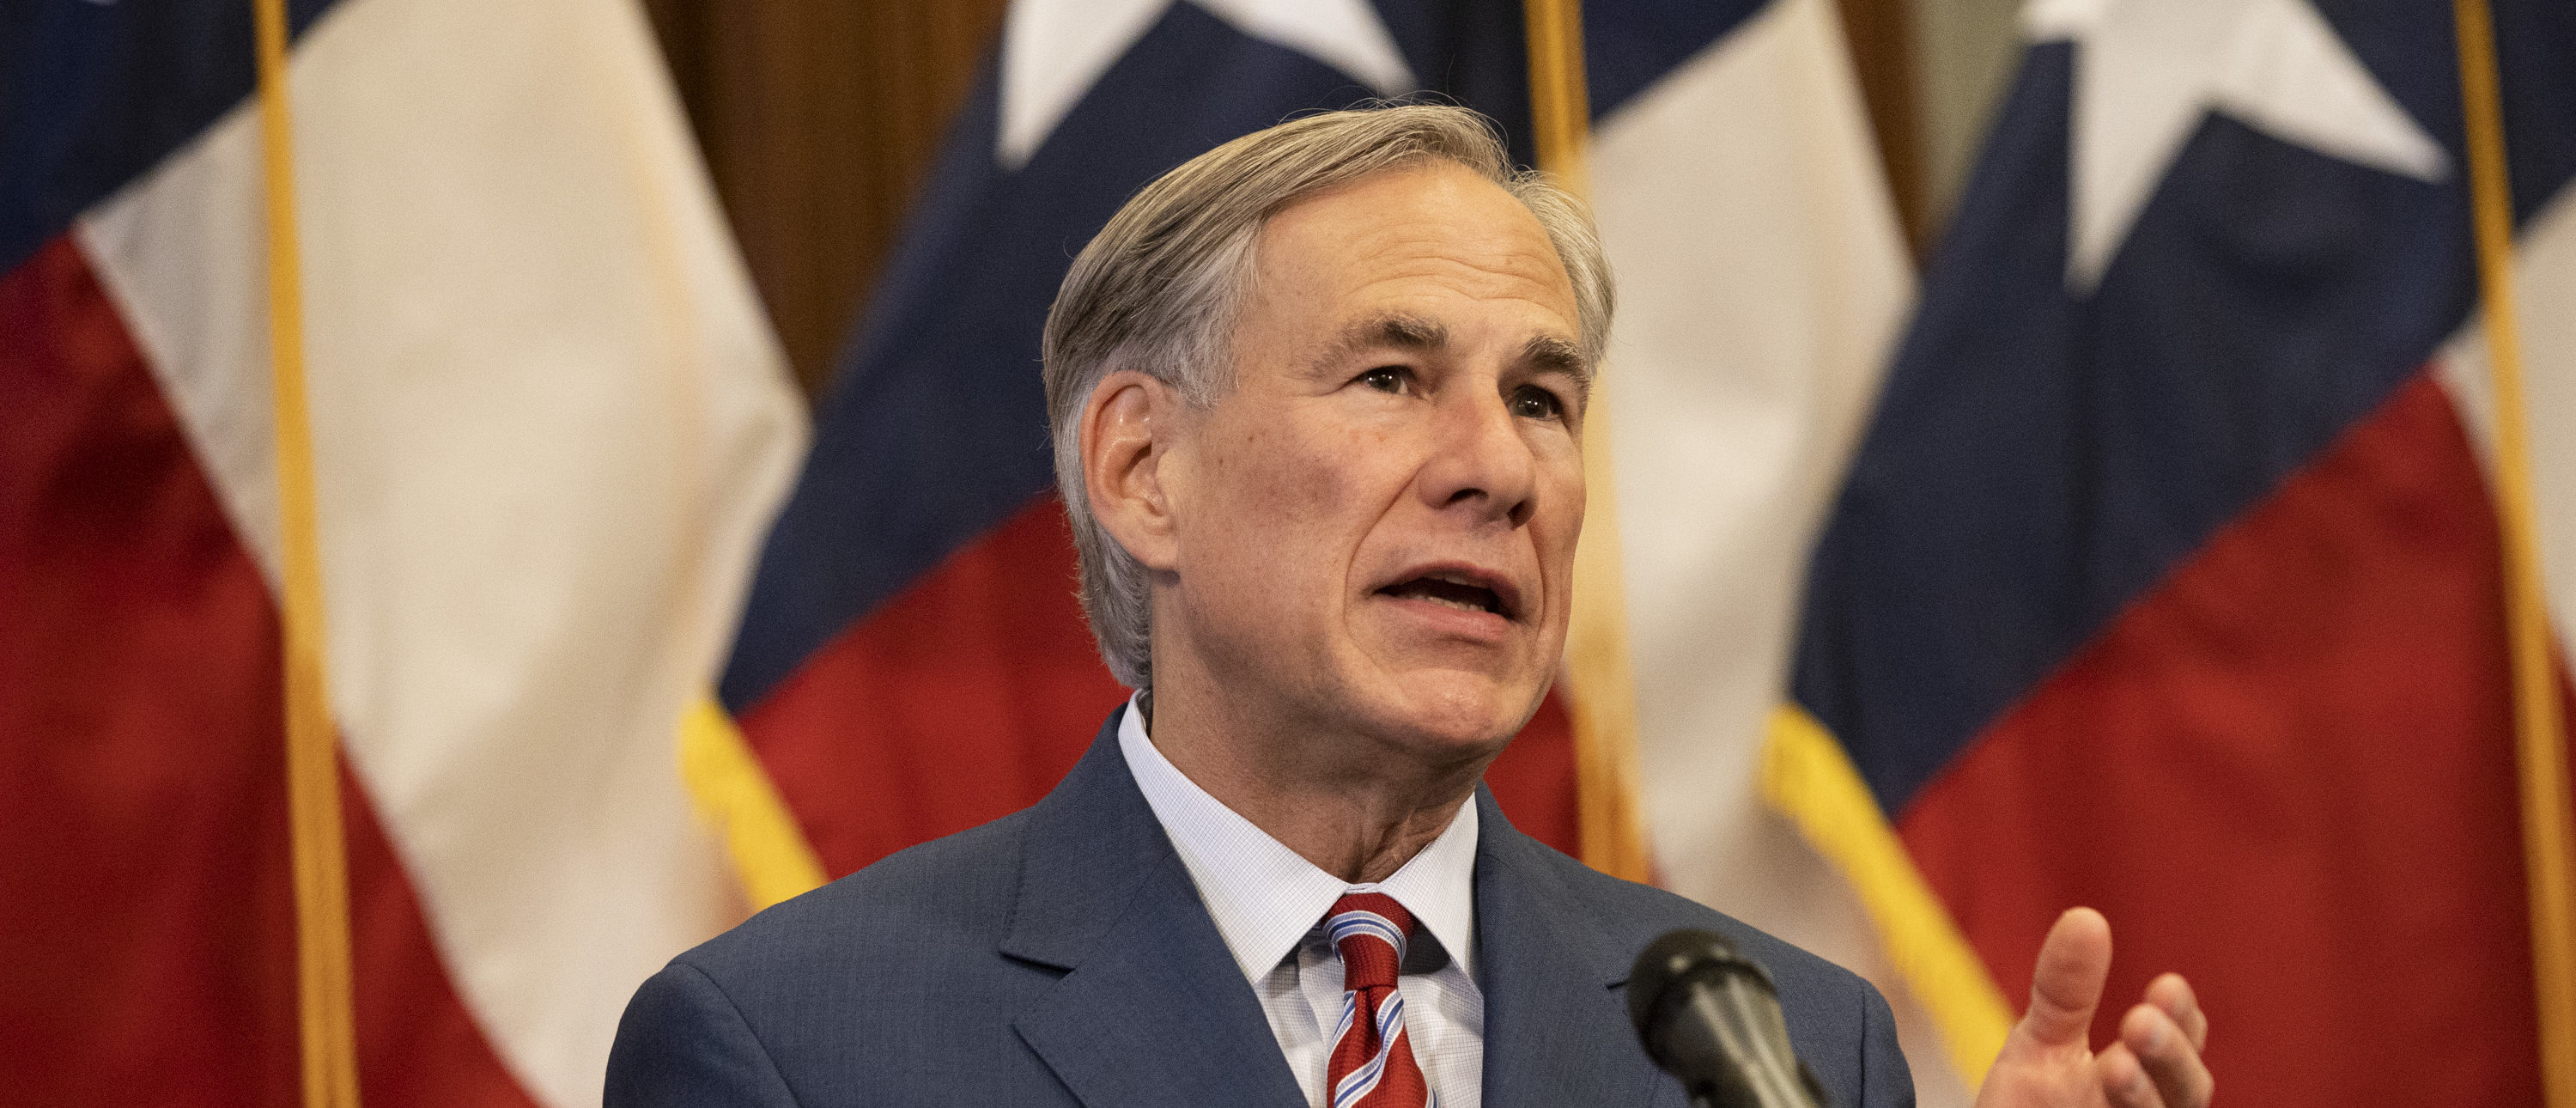 AUSTIN, TX - MAY 18: (EDITORIAL USE ONLY) Texas Governor Greg Abbott announces the reopening of more Texas businesses during the COVID-19 pandemic at a press conference at the Texas State Capitol in Austin on Monday, May 18, 2020. Abbott said that childcare facilities, youth camps, some professional sports, and bars may now begin to fully or partially reopen their facilities as outlined by regulations listed on the Open Texas website. (Photo by Lynda M. Gonzalez-Pool/Getty Images)